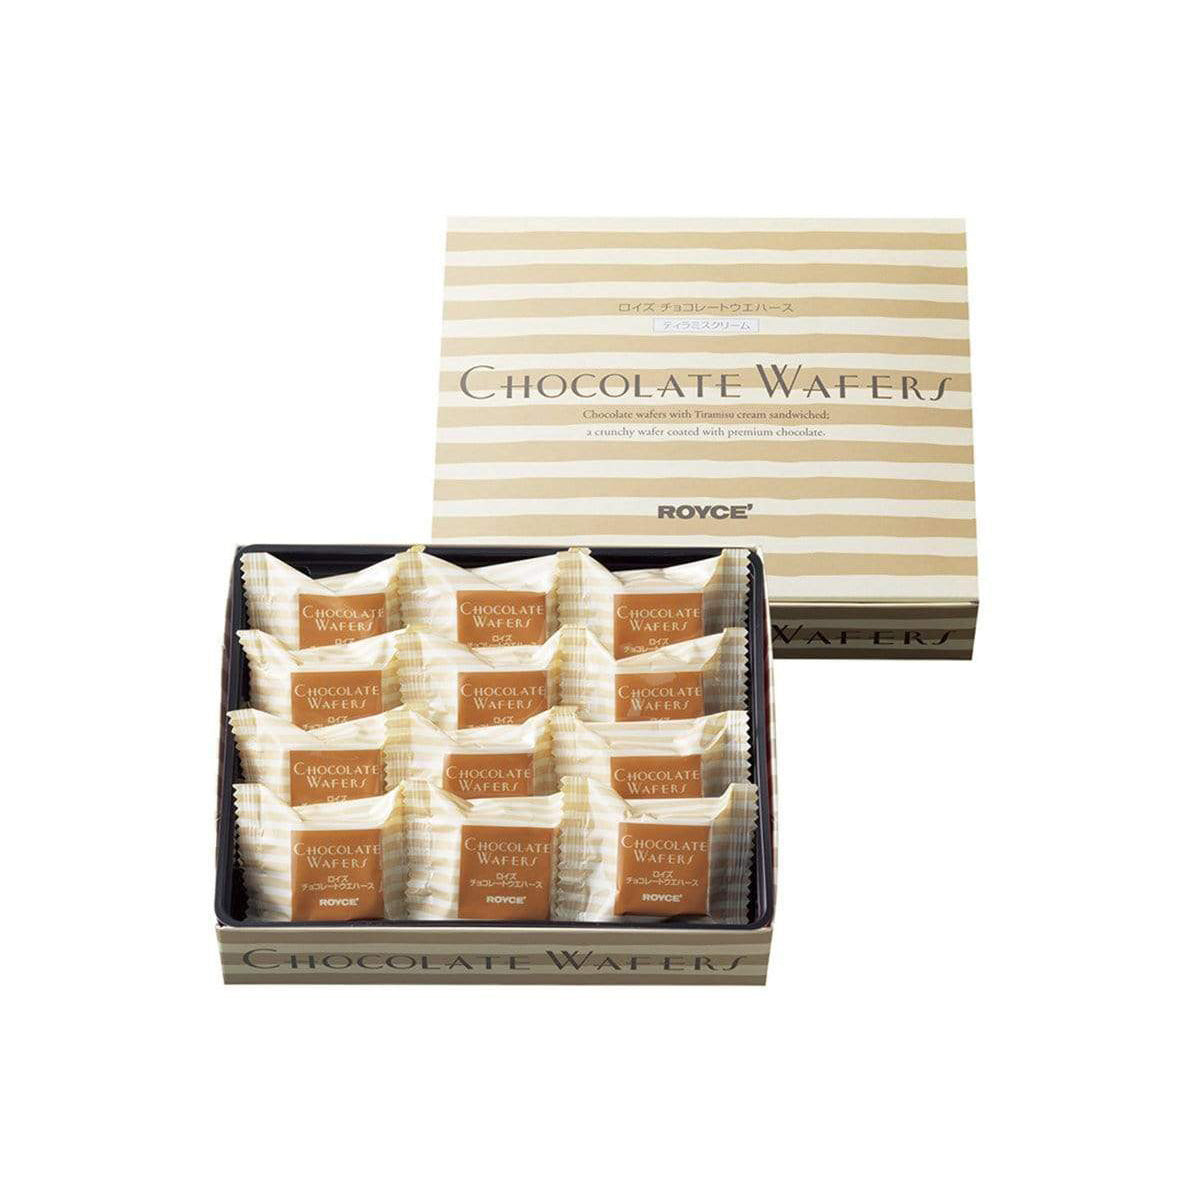 ROYCE' Chocolate - Chocolate Wafers "Tiramisu Cream" - Image on top shows a light brown striped box. Bronze text says Chocolate Wafers Chocolate wafers with Tiramisu cream sandwiched; a crunchy wafer coated with premium chocolate. ROYCE'. Text on the bottom part says Chocolate Wafers. Below is a light brown box filled with individually-wrapped wafers with light brown striped wrapper. Bronze text on each says Chocolate Wafers ROYCE'. Bronze text on the bottom part says Chocolate Wafers.